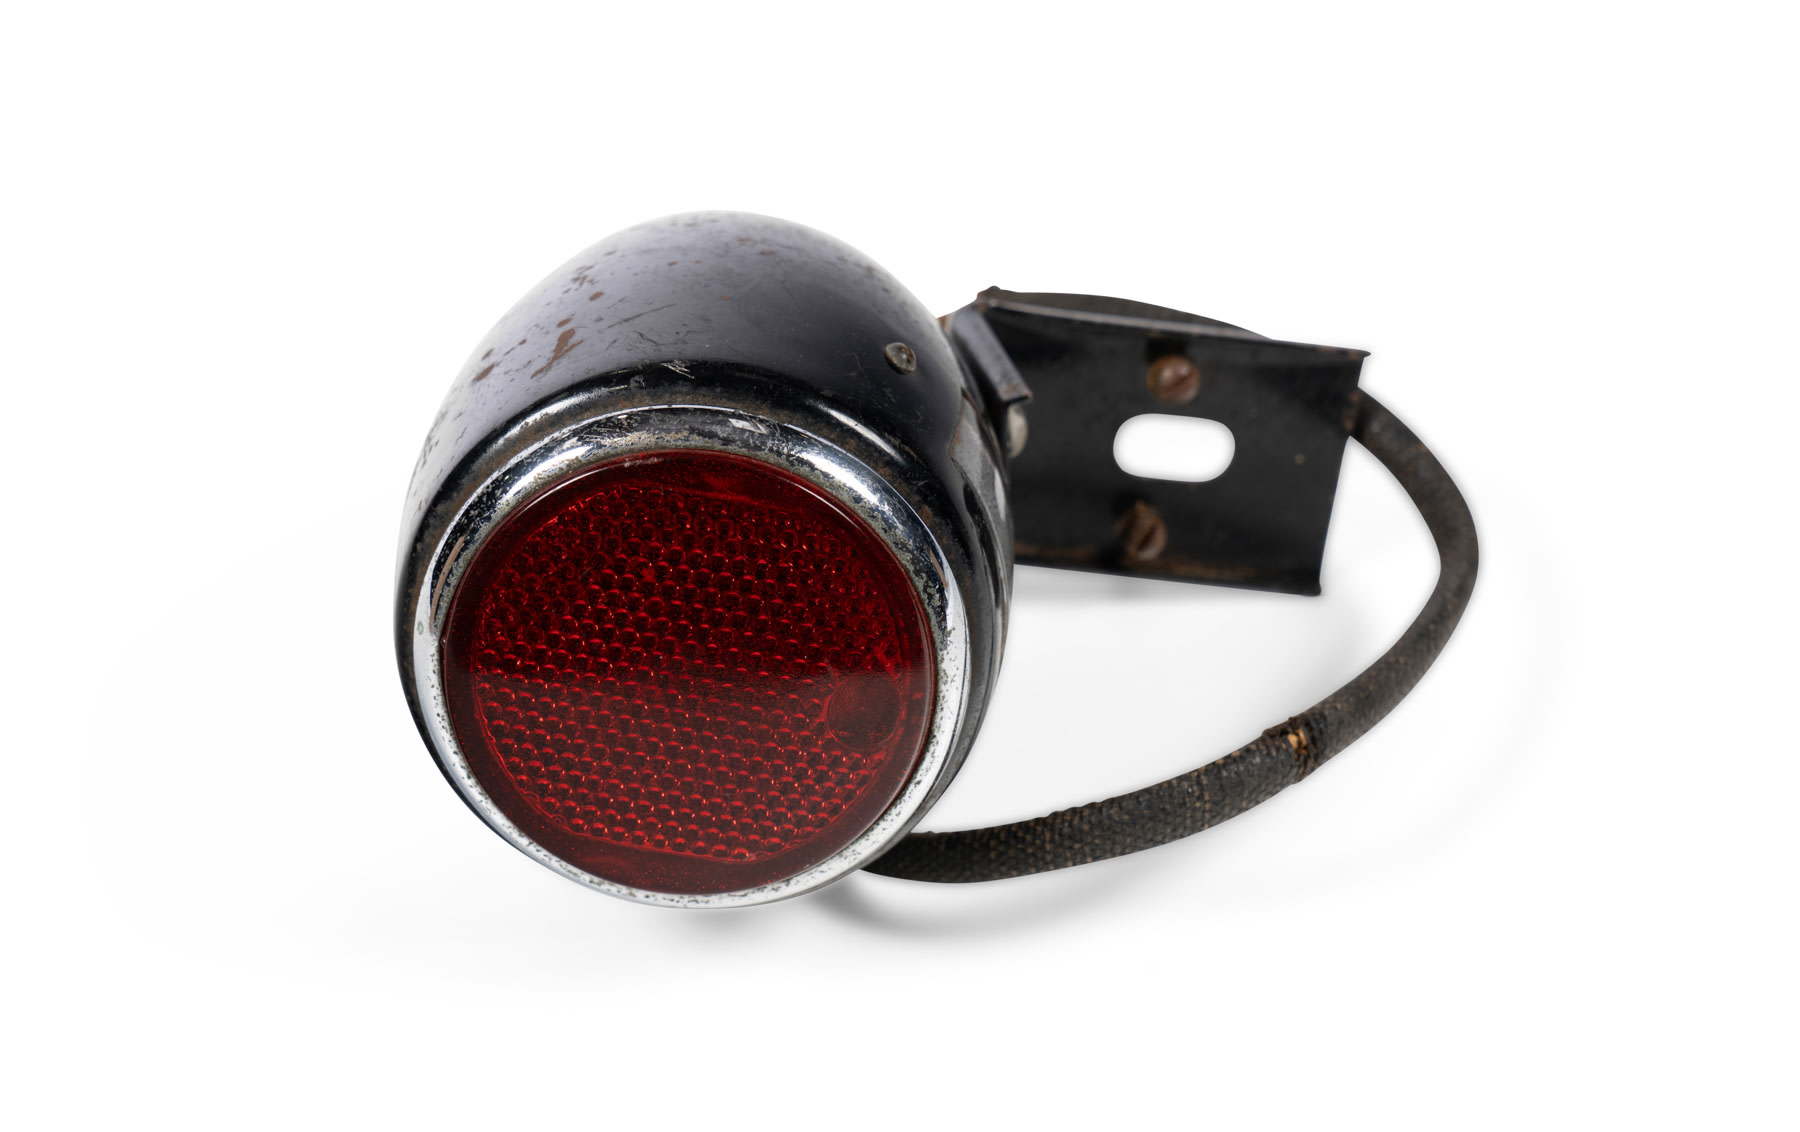 Dulite Teardrop Red Taillight with License Plate Lamp and Bracket